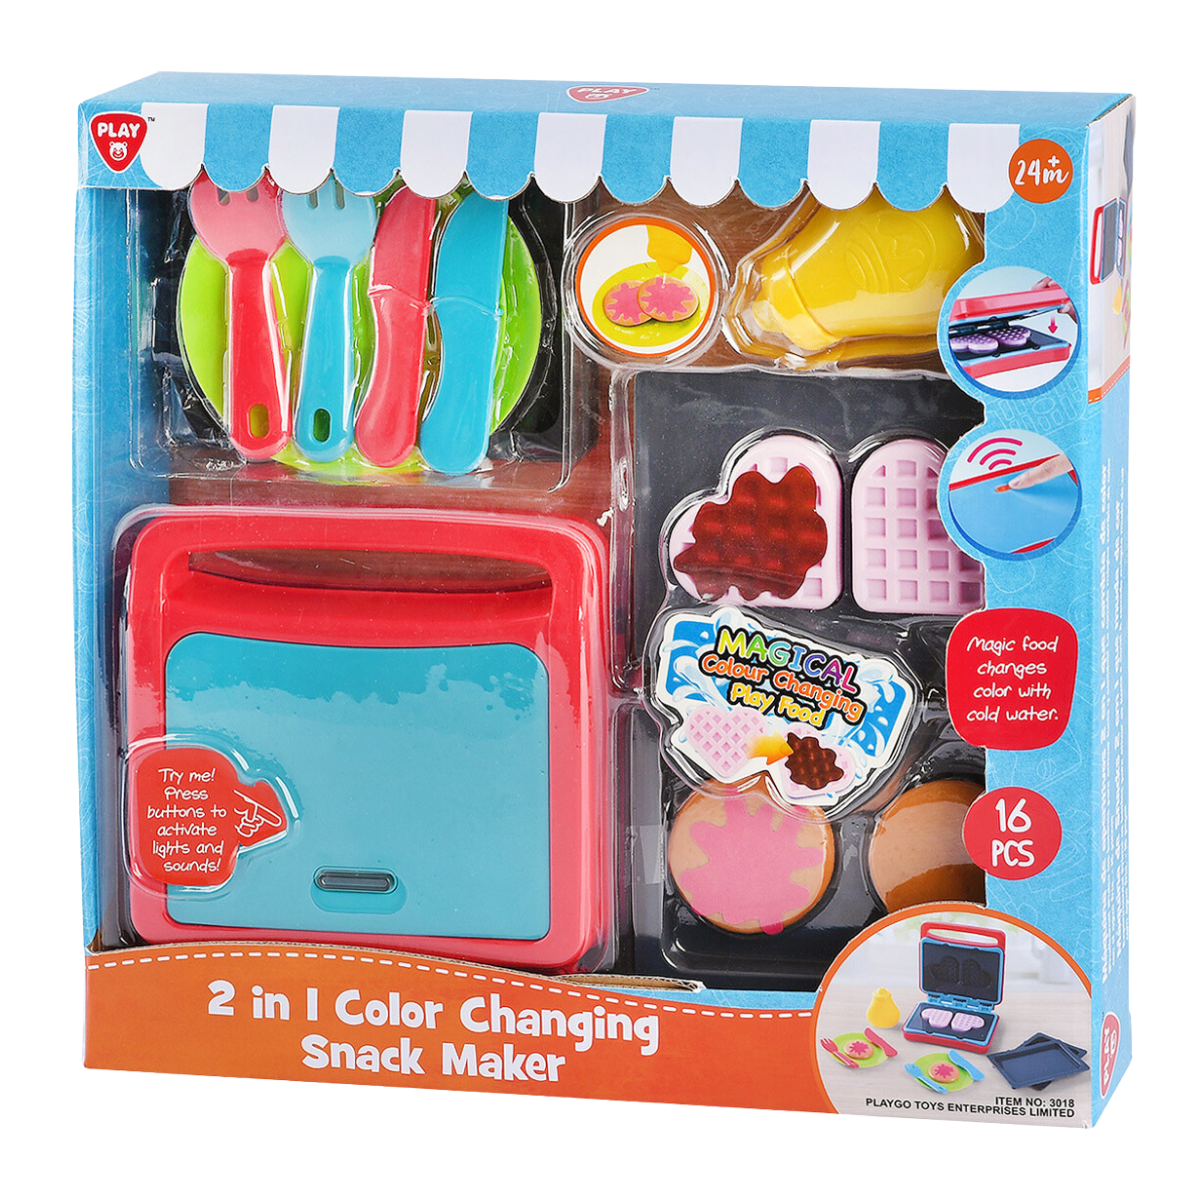 2 in 1 Color Changing Snack Maker